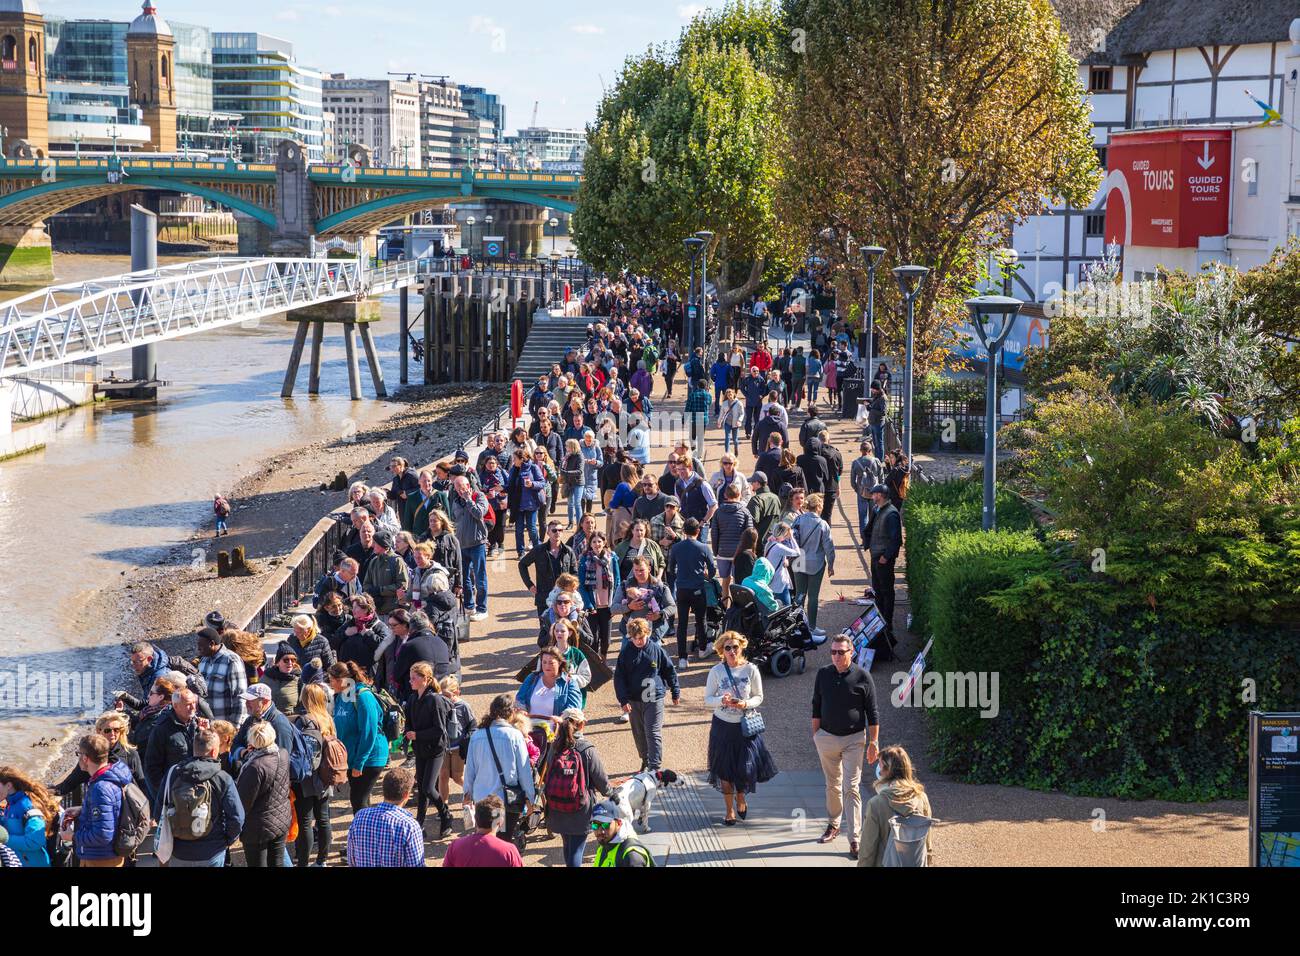 London, UK. 17th Sep 2022. Members of the public queuing outside the famous Shakespeare's Globe to attend the Lying-in-state of Queen Elizabeth II. Credit: Stuart Robertson/Alamy Live News. Stock Photo